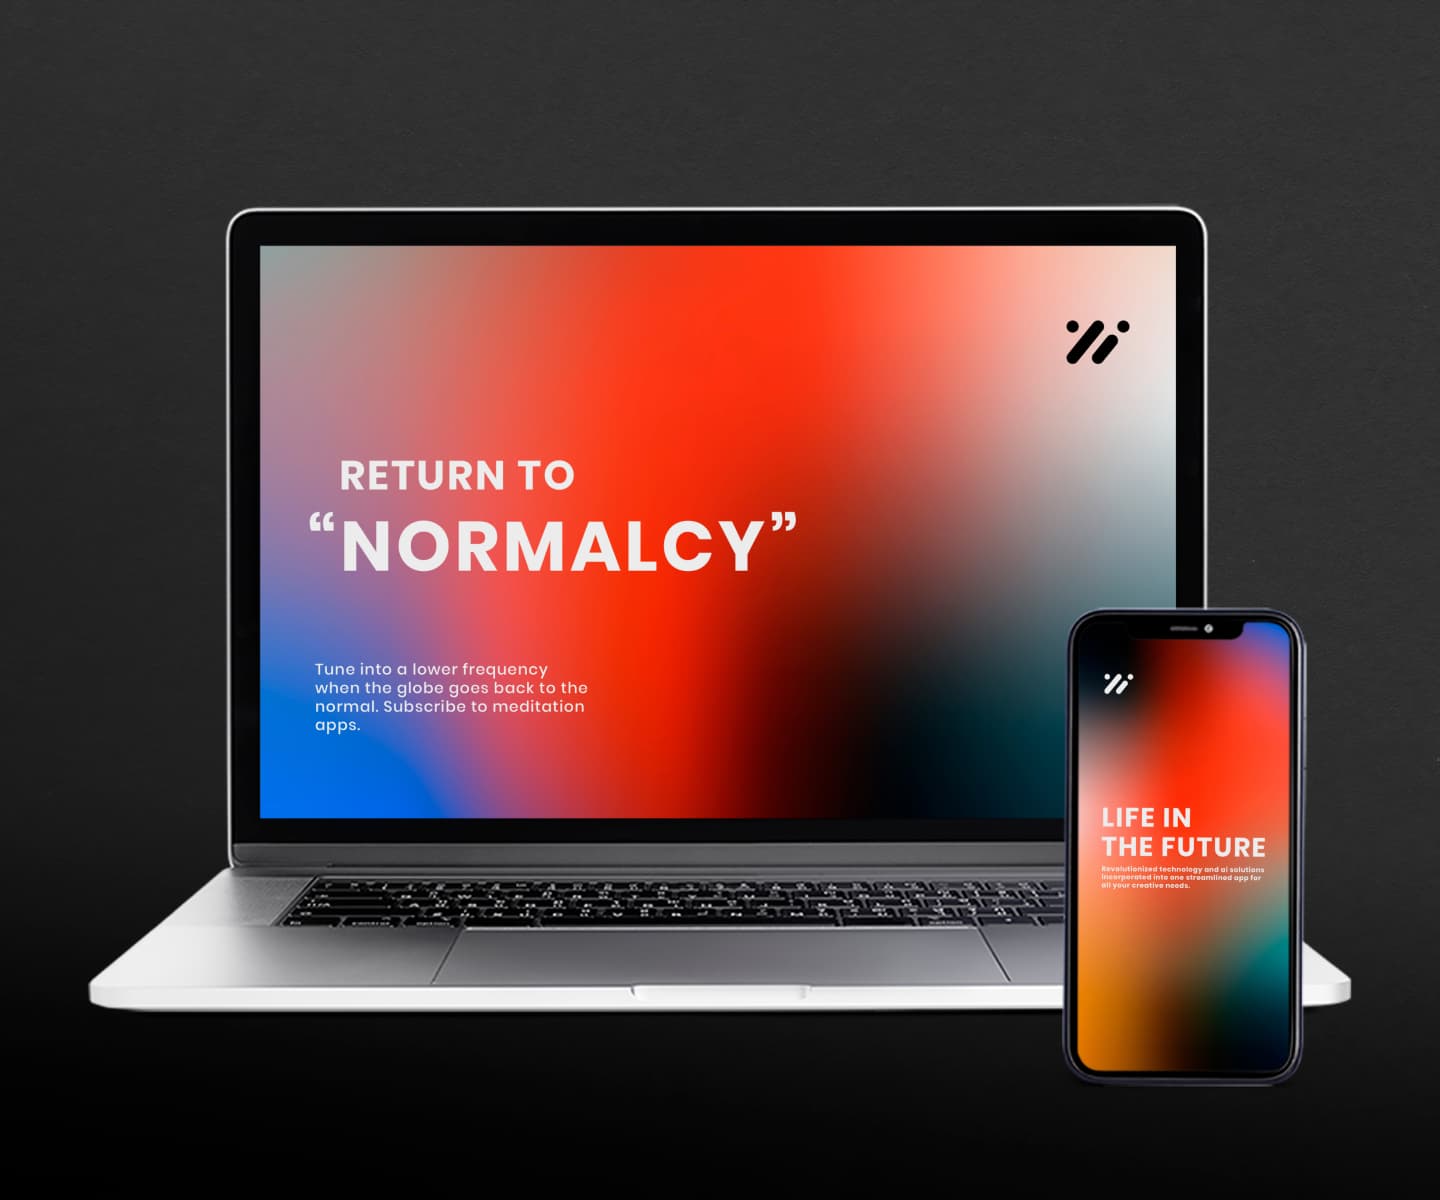 App Mockup on Mac and iPhone with 'Return to Normalcy' Text